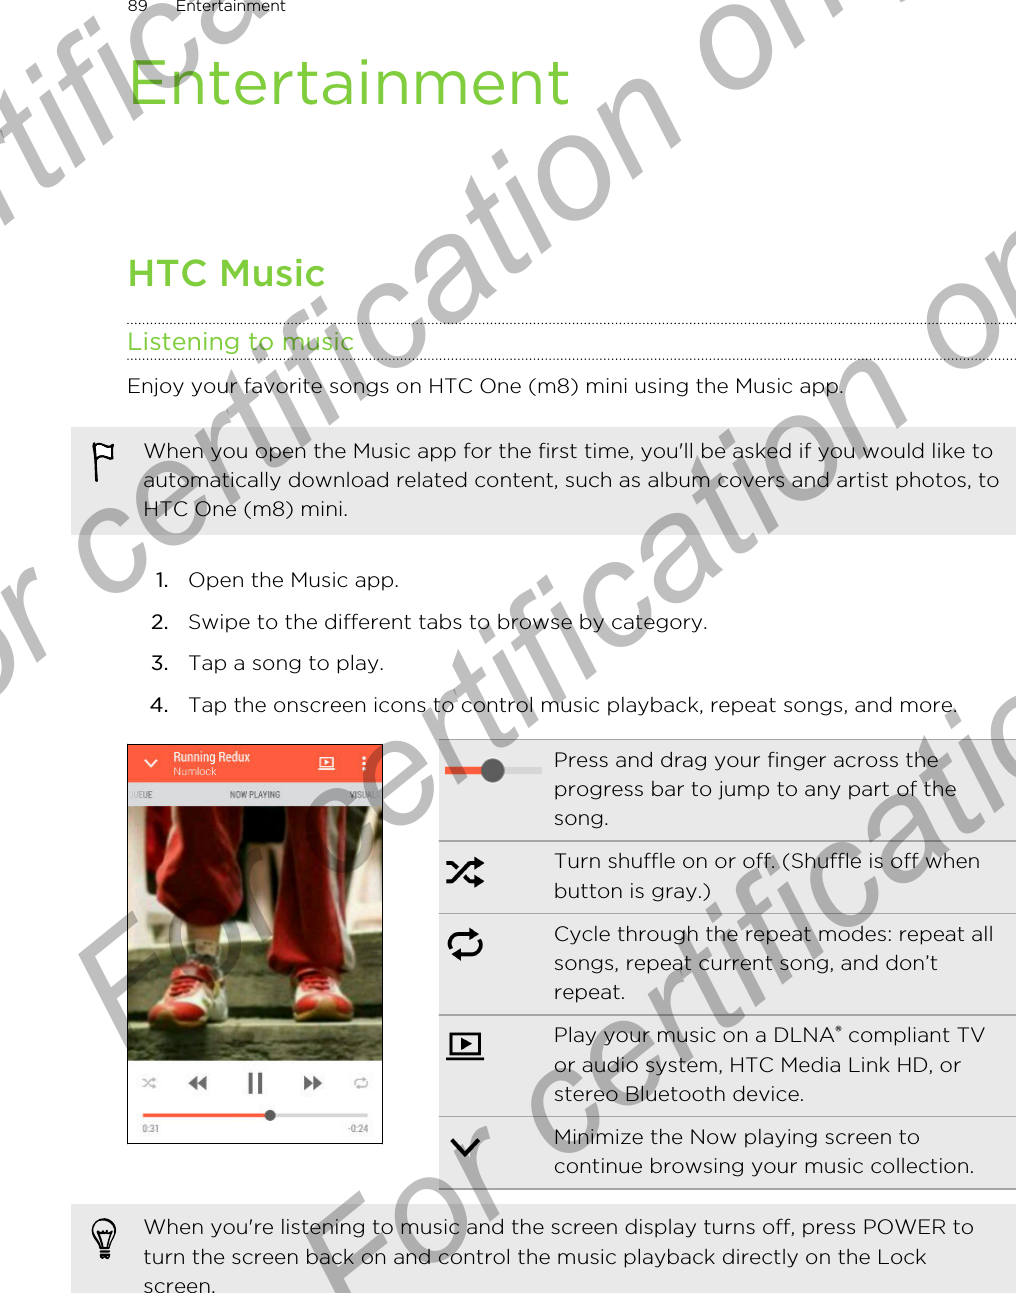 EntertainmentHTC MusicListening to musicEnjoy your favorite songs on HTC One (m8) mini using the Music app.When you open the Music app for the first time, you&apos;ll be asked if you would like toautomatically download related content, such as album covers and artist photos, toHTC One (m8) mini.1. Open the Music app.2. Swipe to the different tabs to browse by category.3. Tap a song to play.4. Tap the onscreen icons to control music playback, repeat songs, and more.Press and drag your finger across theprogress bar to jump to any part of thesong.Turn shuffle on or off. (Shuffle is off whenbutton is gray.)Cycle through the repeat modes: repeat allsongs, repeat current song, and don’trepeat.Play your music on a DLNA® compliant TVor audio system, HTC Media Link HD, orstereo Bluetooth device.Minimize the Now playing screen tocontinue browsing your music collection.When you&apos;re listening to music and the screen display turns off, press POWER toturn the screen back on and control the music playback directly on the Lockscreen.89 EntertainmentFor certification only  For certification only  For certification only  For certification only 